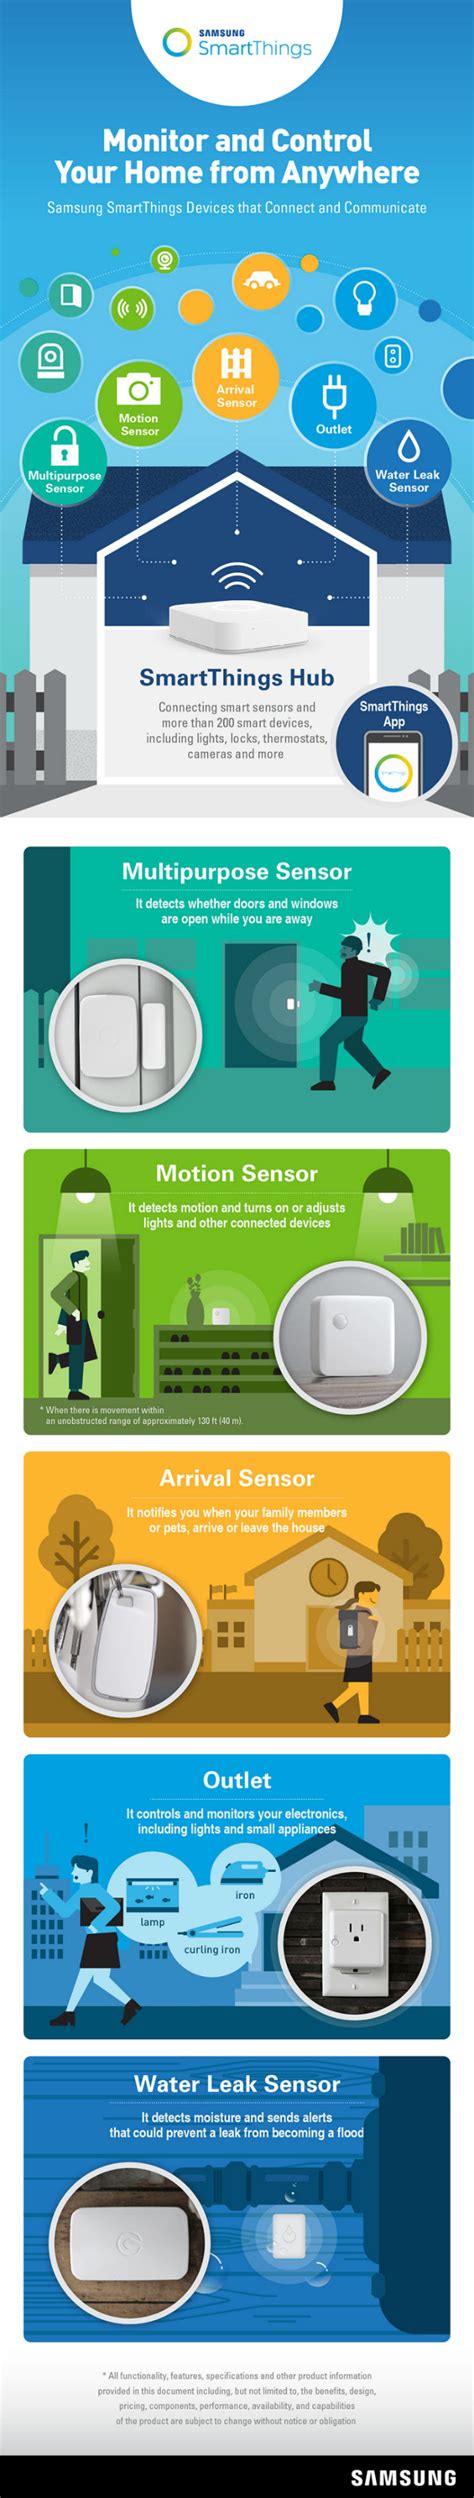 [Infographic] Monitor and Control Your Home from Anywhere ...